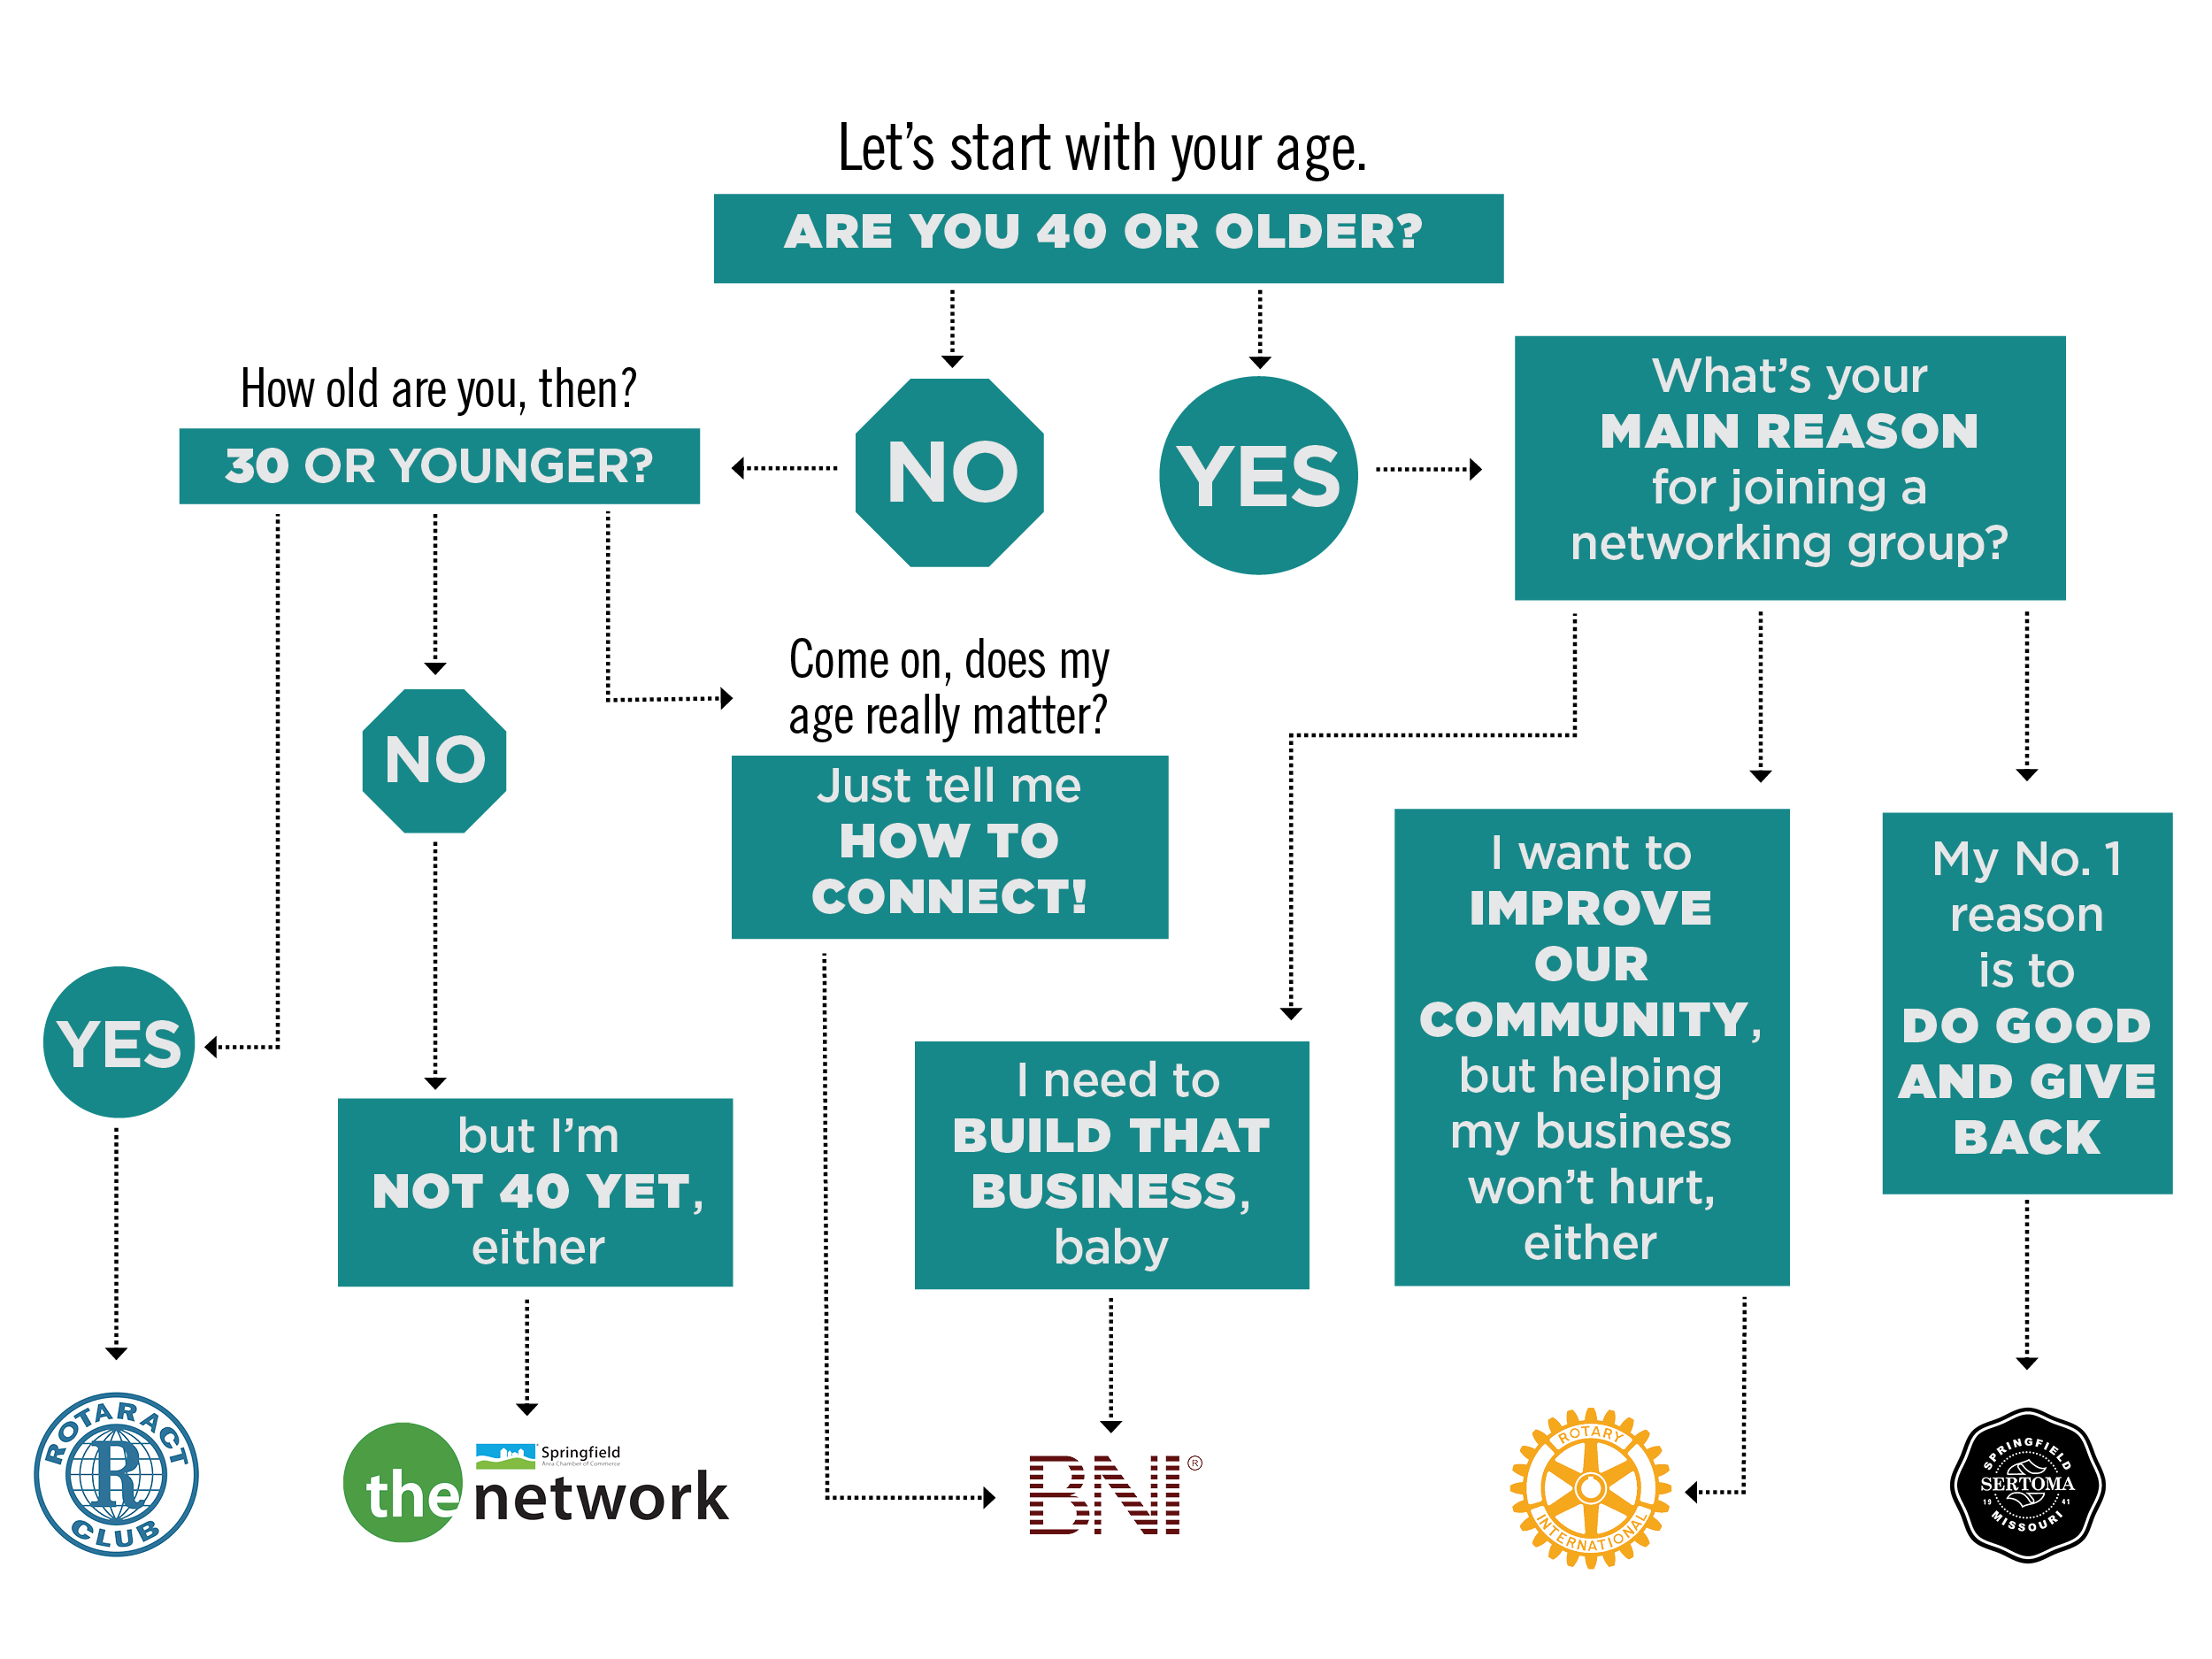 What Networking Group Should You Join?